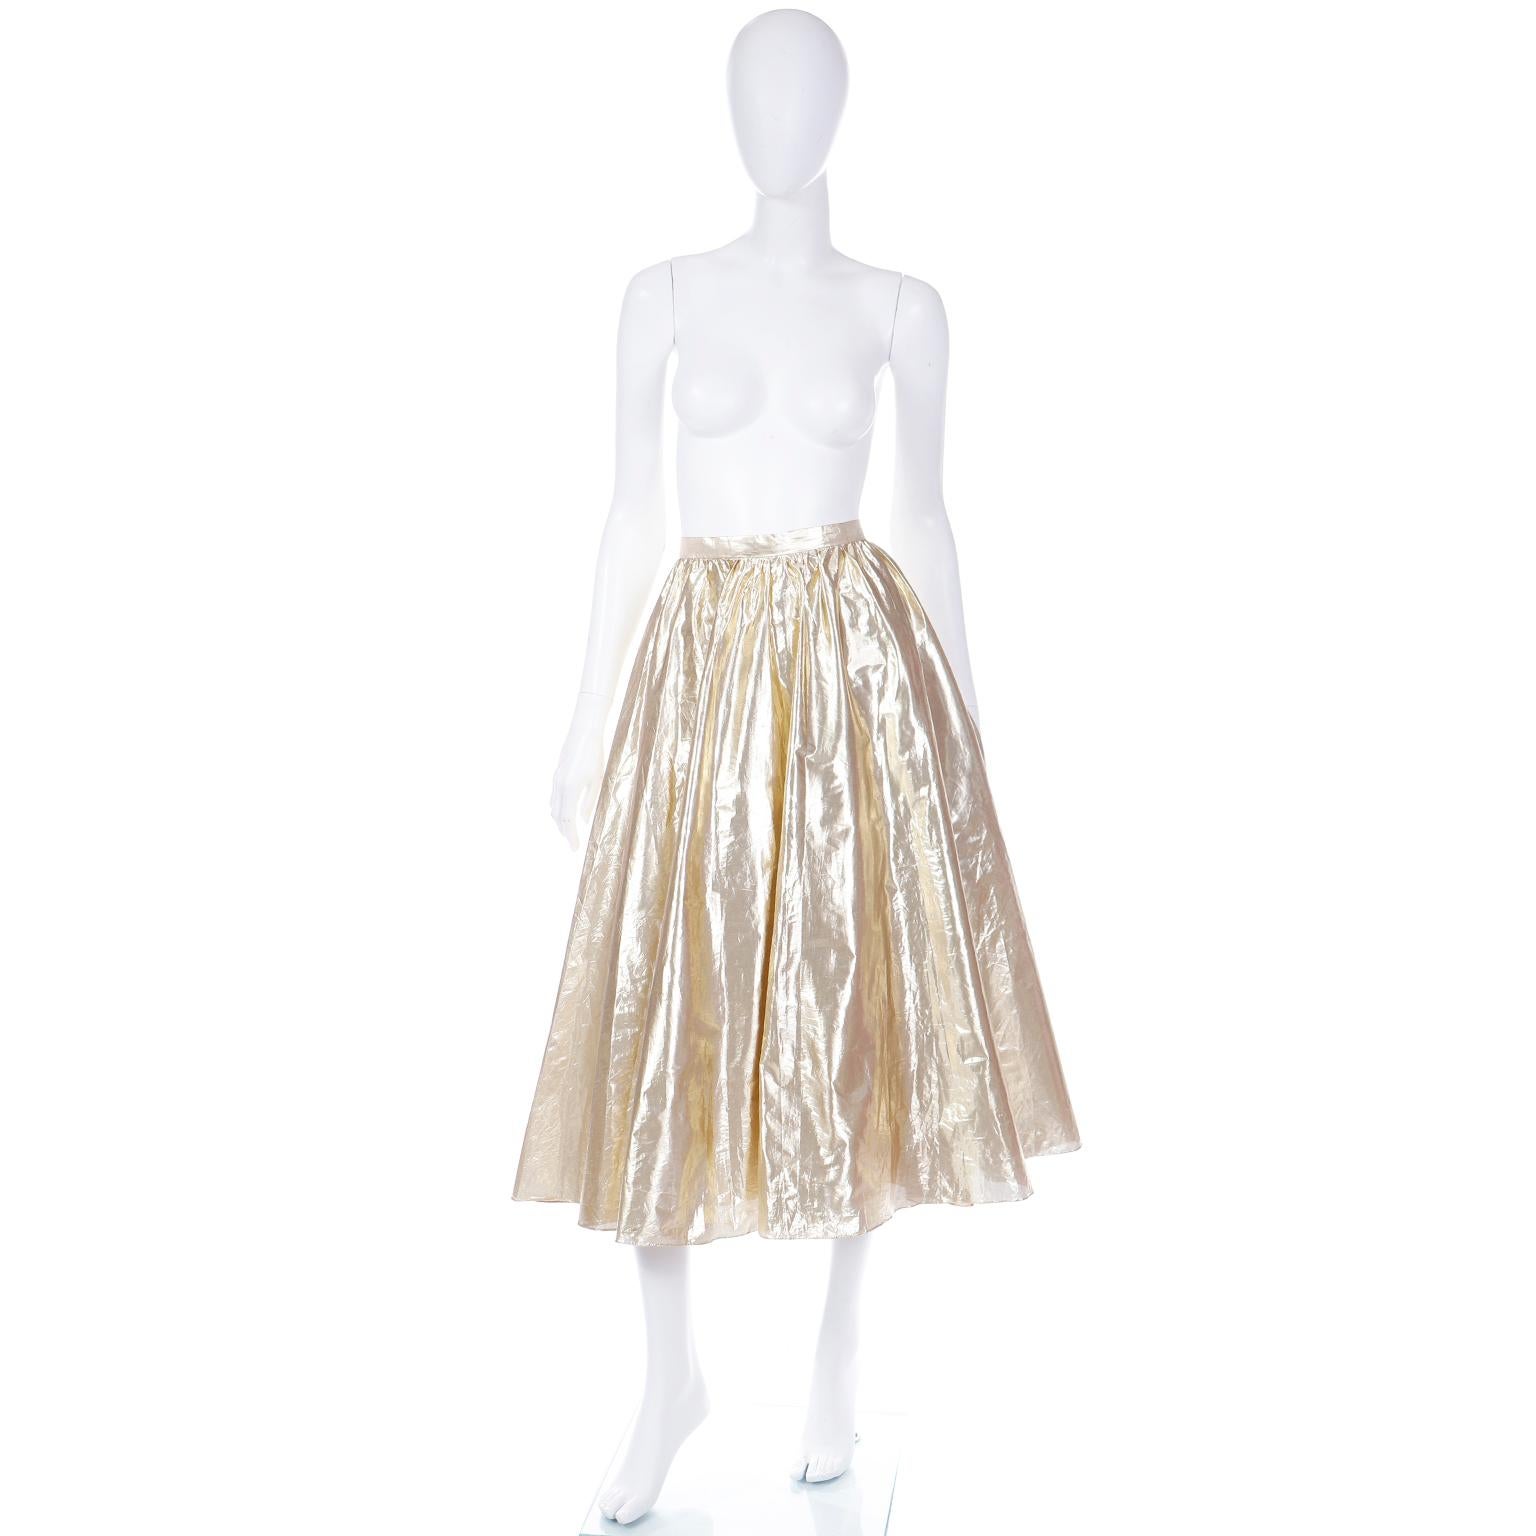 We love this vintage evening skirt! This gorgeous gold tissue lame skirt is fully lined and was made in England and designed by Josh Charles. We think this skirt could be paired with a tee shirt or cropped sweater to make it more casual, or you can